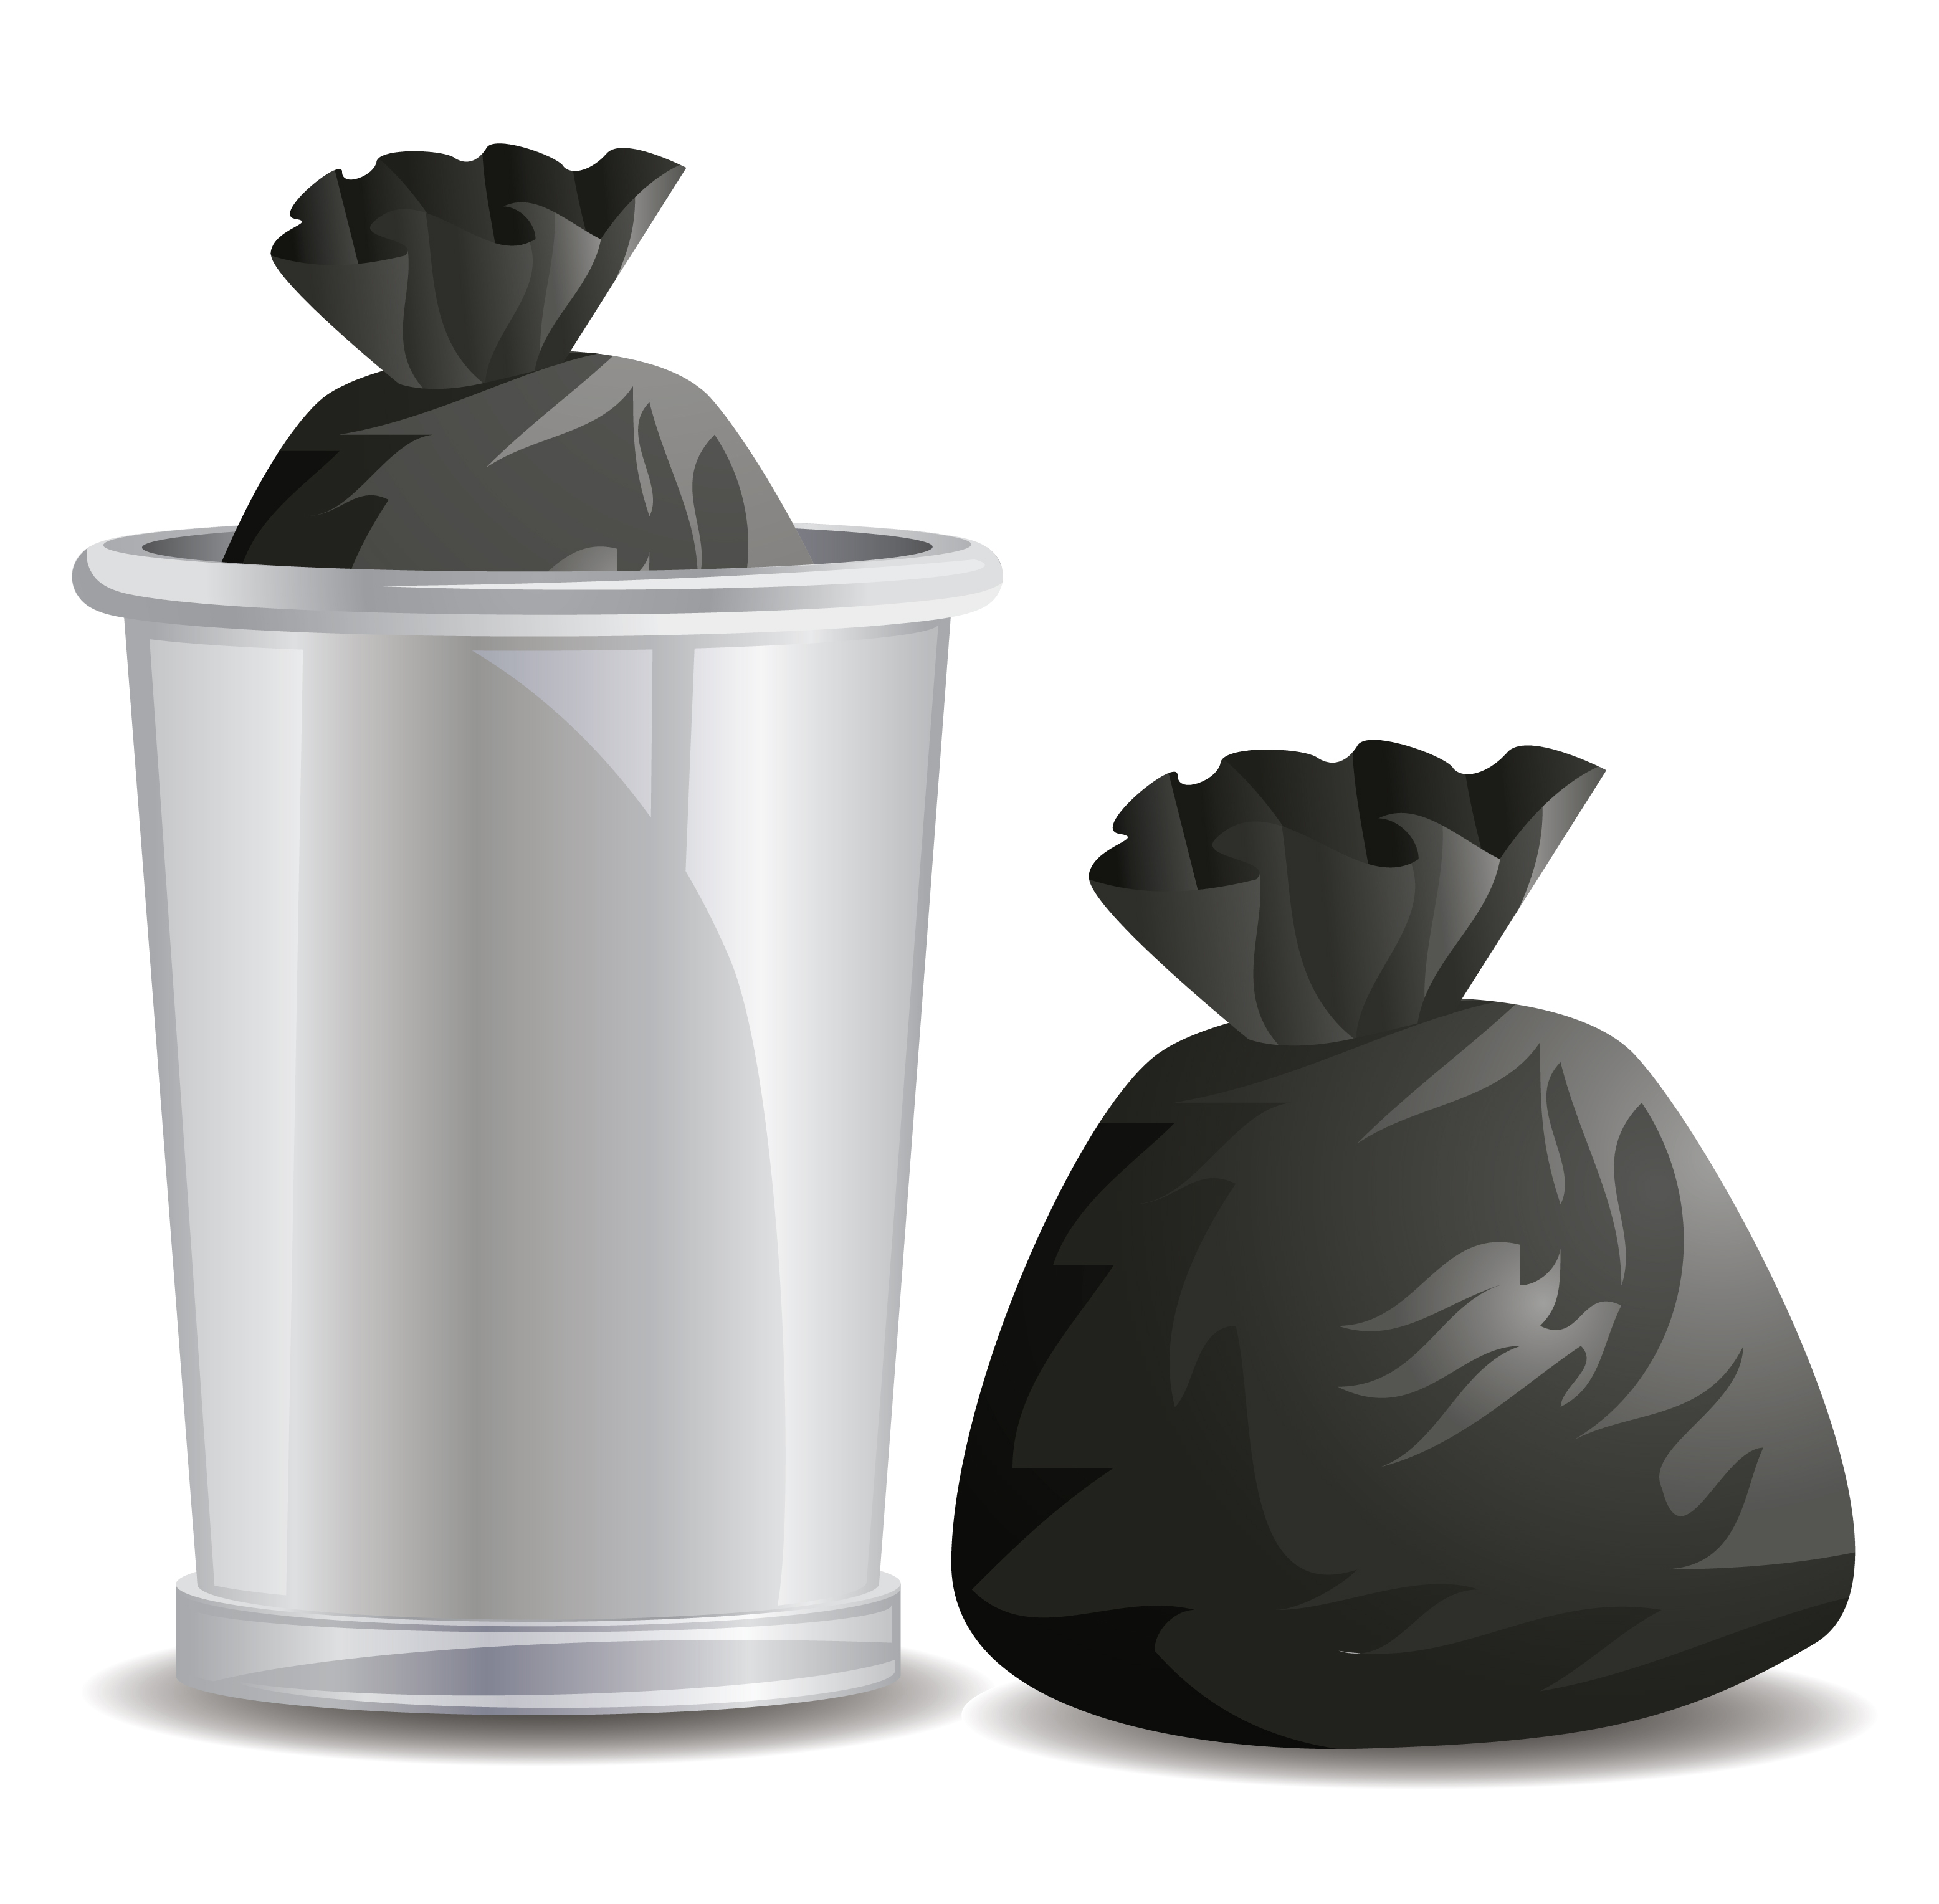 D-Liner addresses both of these issues with a plastic cylinder that goes around the edge of the garbage bag.